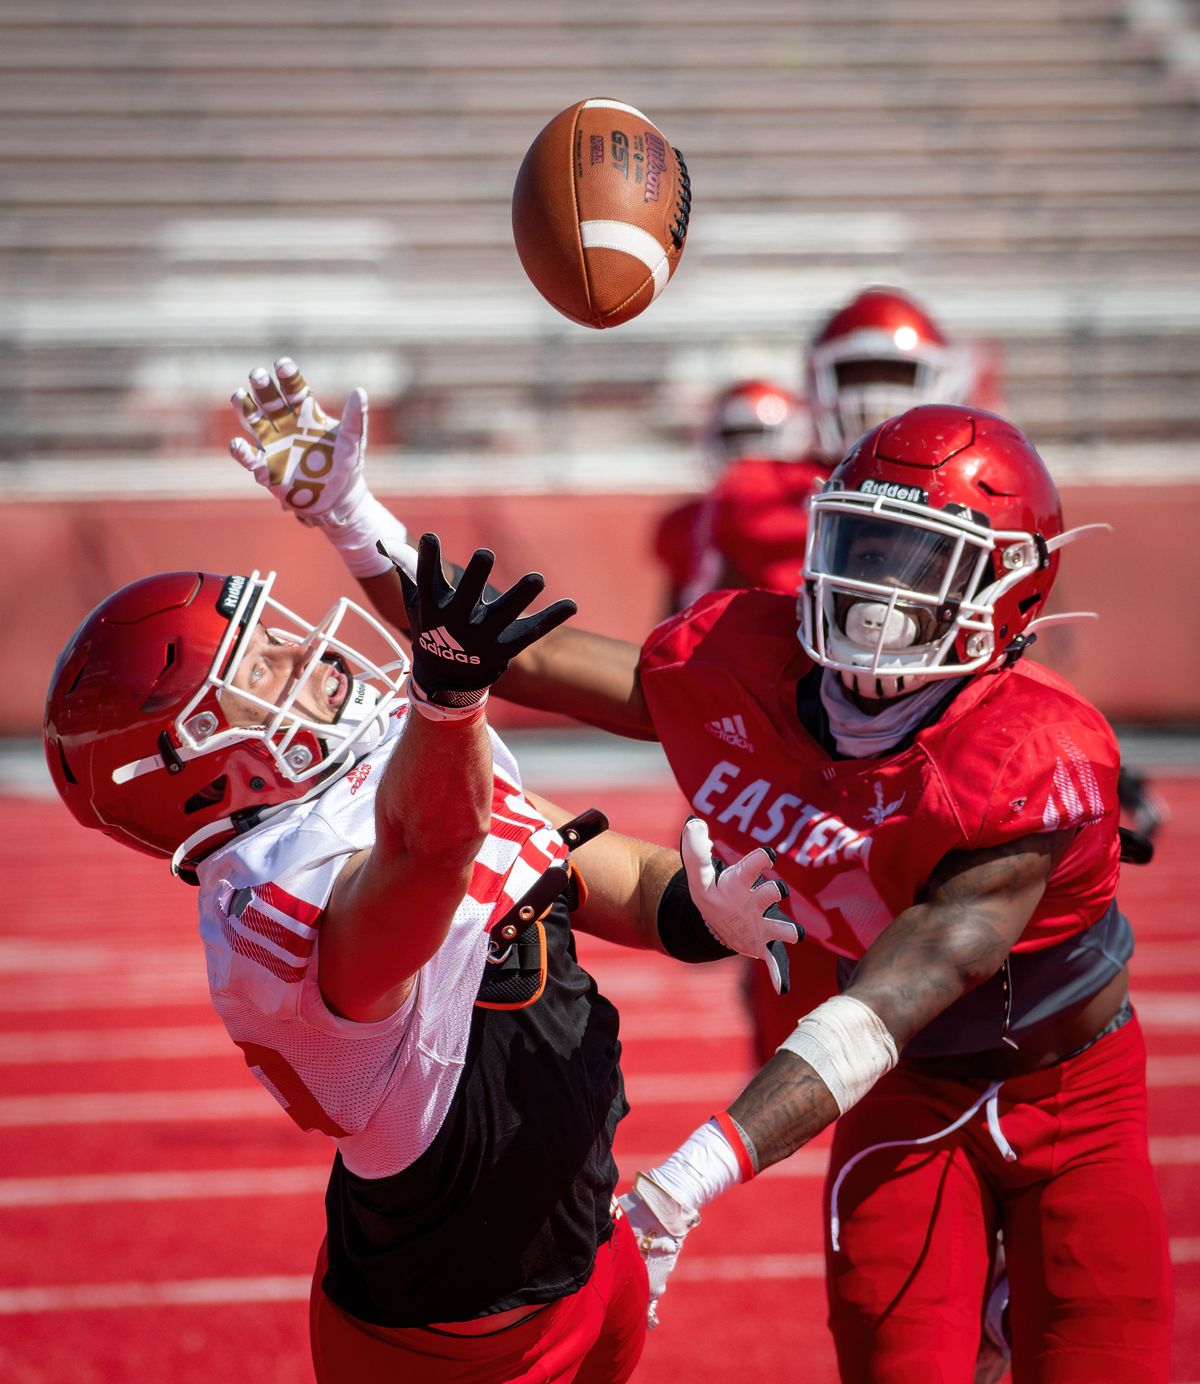 EWU wide receiver Efton Chism III on left, eyes a just-out-of-reach pass as defensive back Demetrius Crosby Jr. defends during a scrimmage, Wed. August 18, 2021.  (COLIN MULVANY/THE SPOKESMAN-REVIEW)